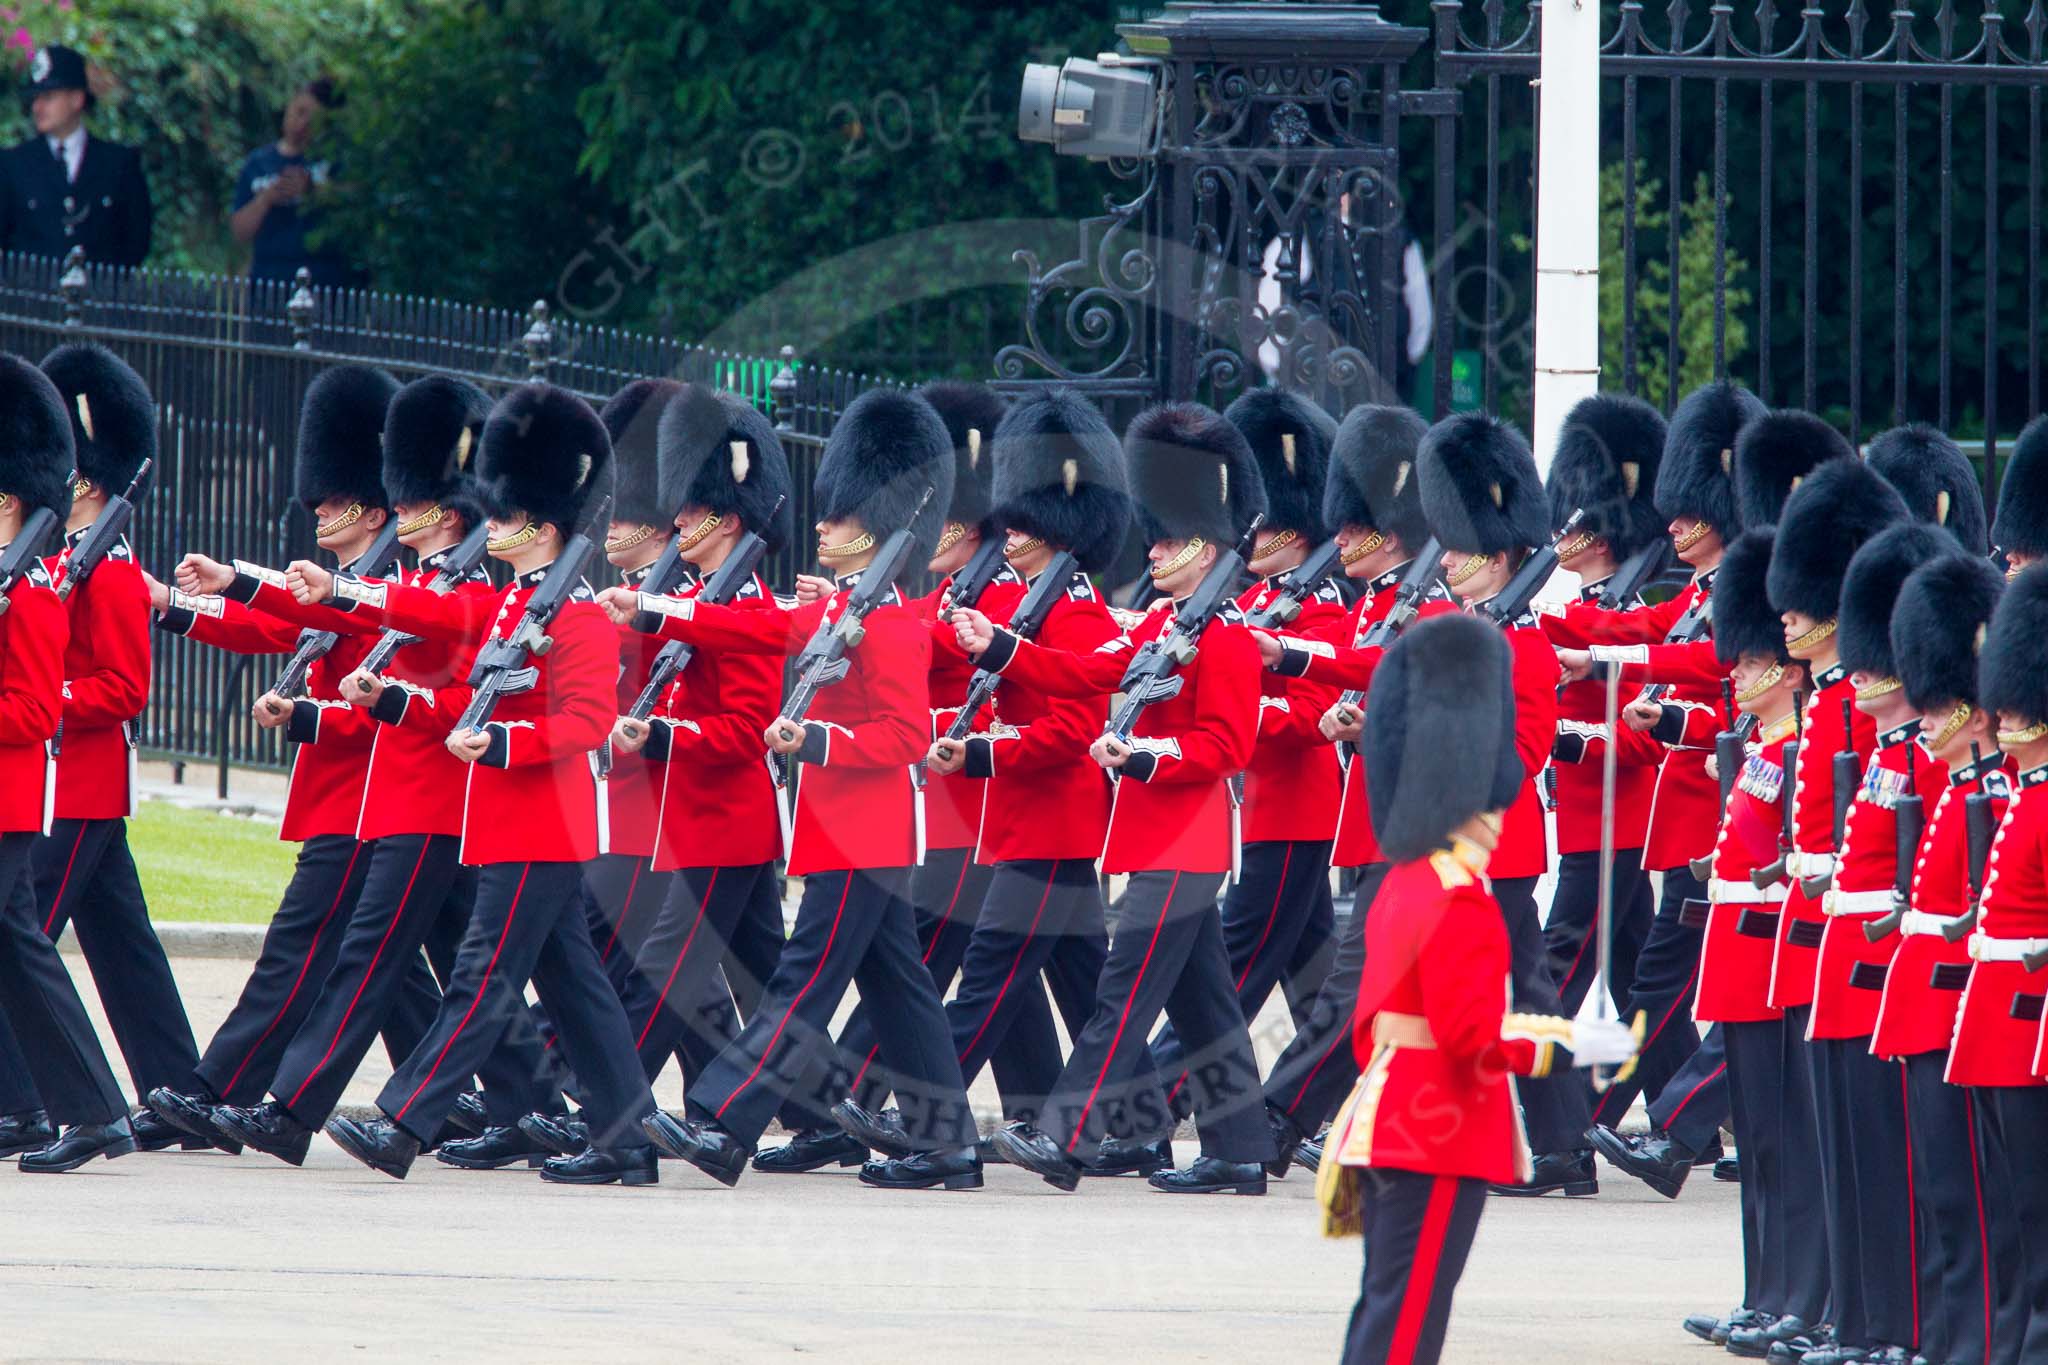 Trooping the Colour 2014.
Horse Guards Parade, Westminster,
London SW1A,

United Kingdom,
on 14 June 2014 at 10:30, image #175